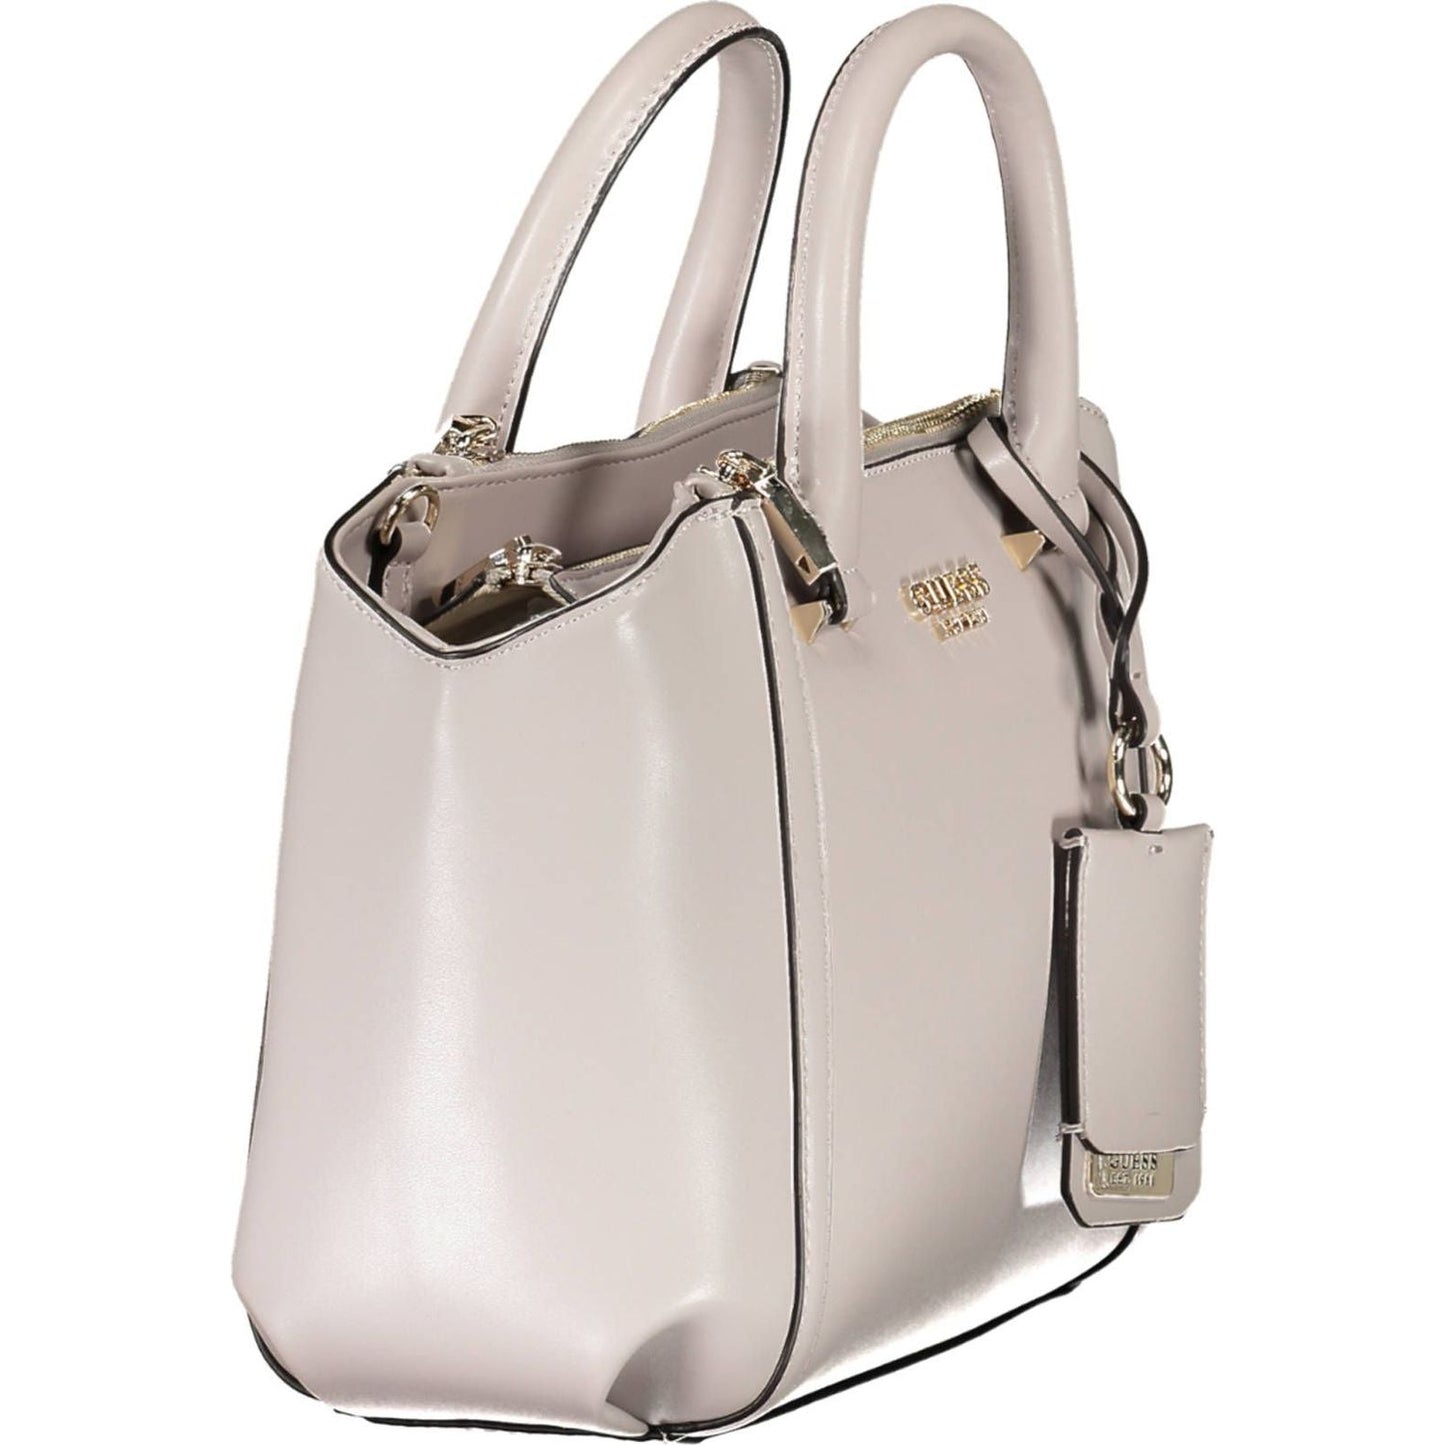 Guess Jeans Elegant Gray Handbag with Contrasting Accents elegant-gray-handbag-with-contrasting-accents